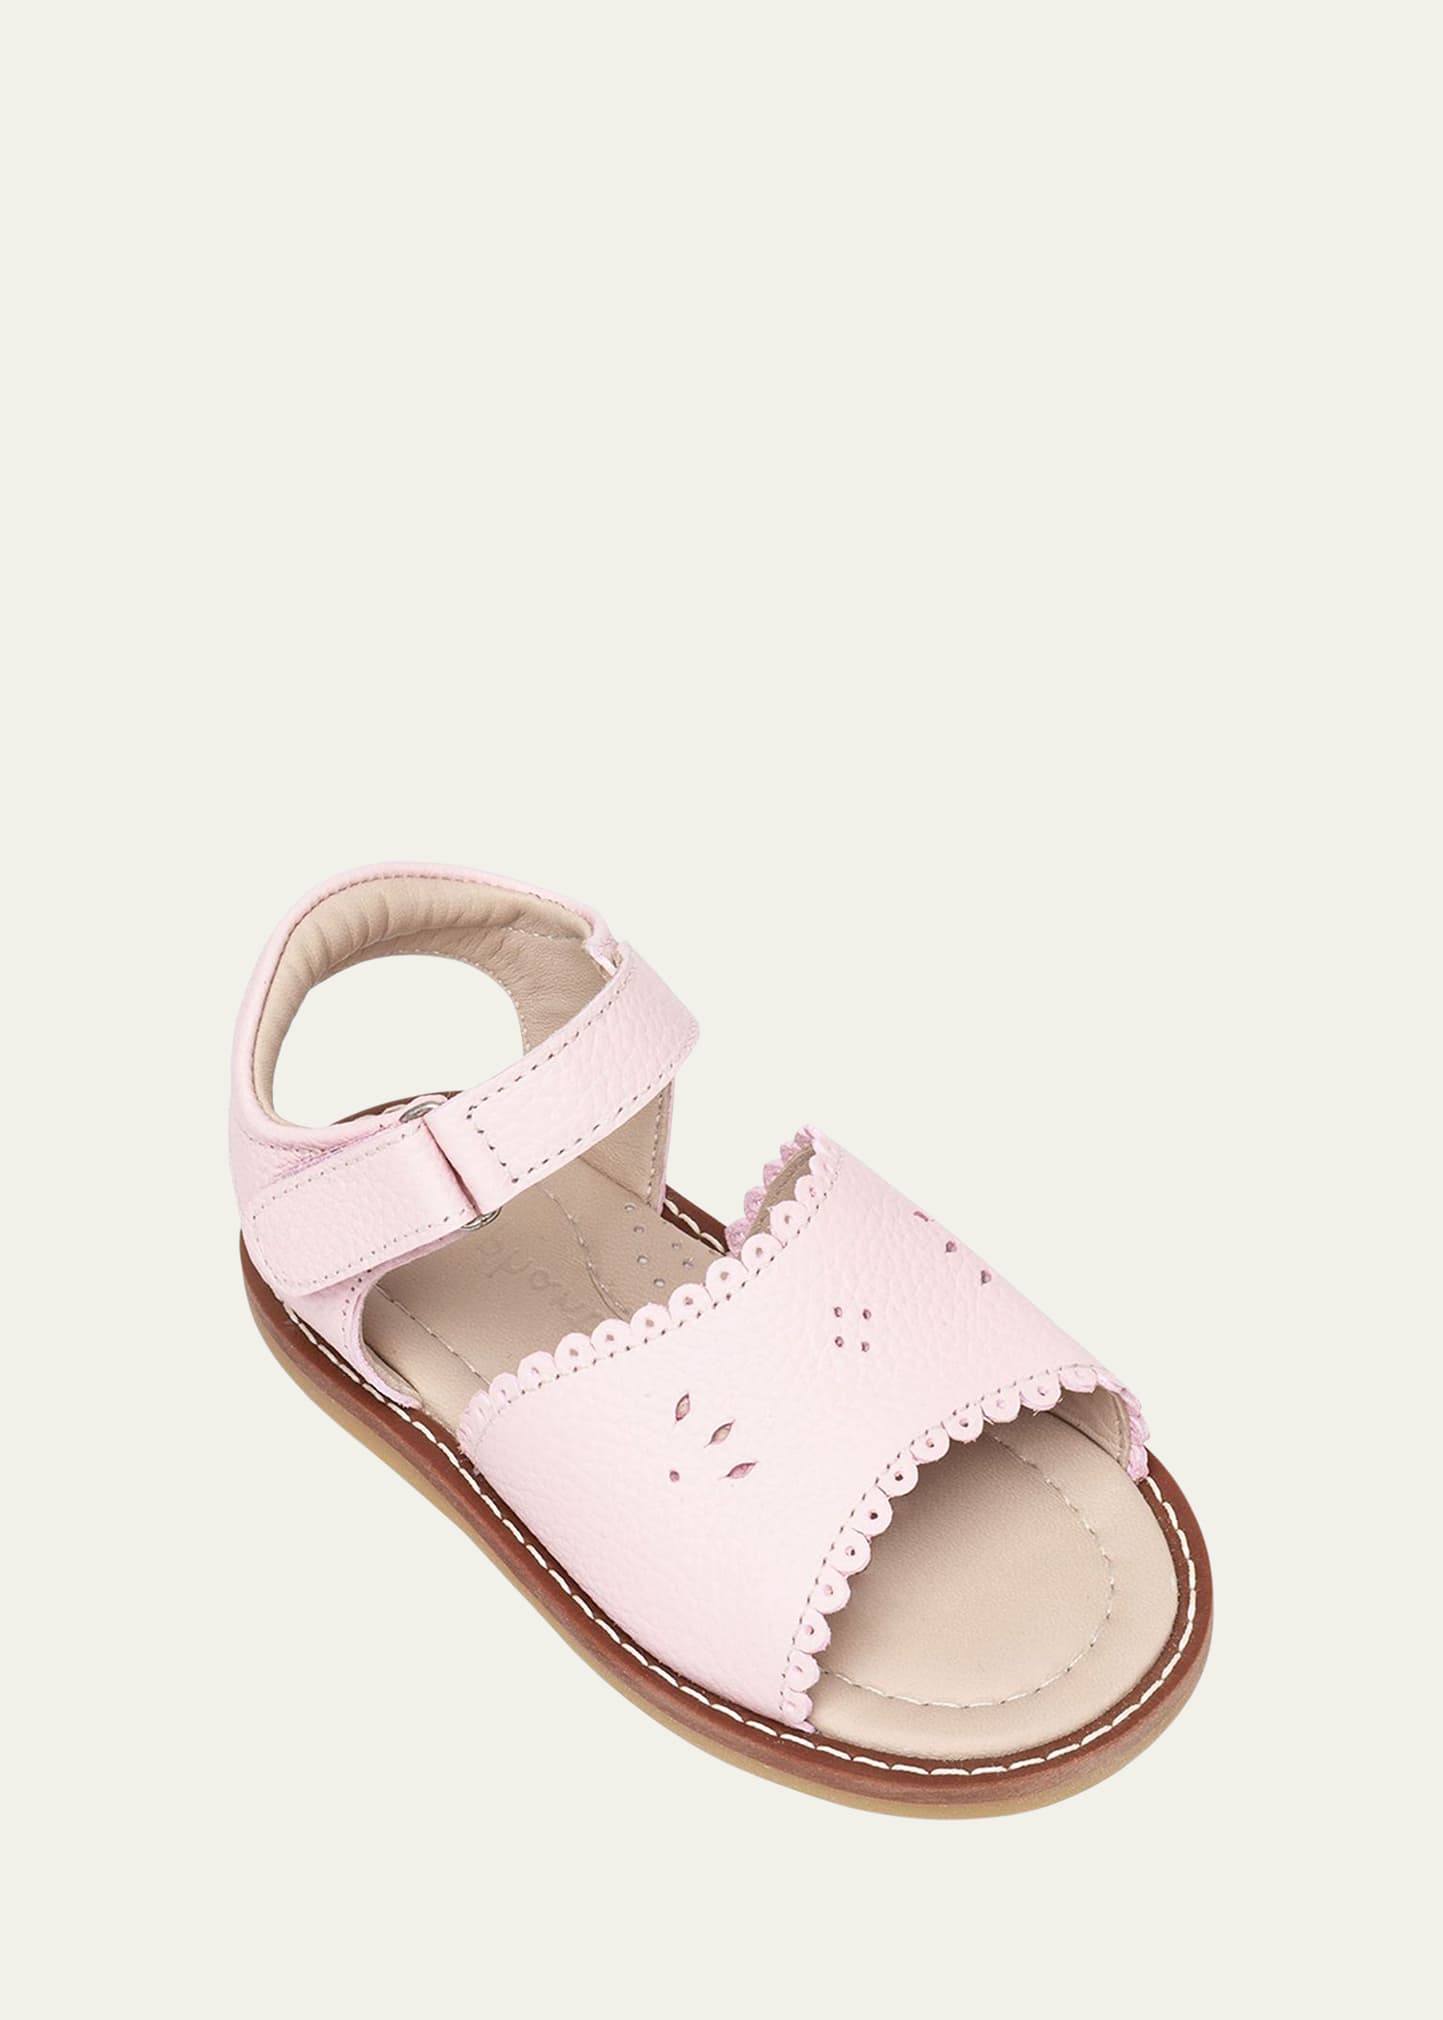 ELEPHANTITO GIRL'S SCALLOPED LEATHER SANDALS, TODDLER